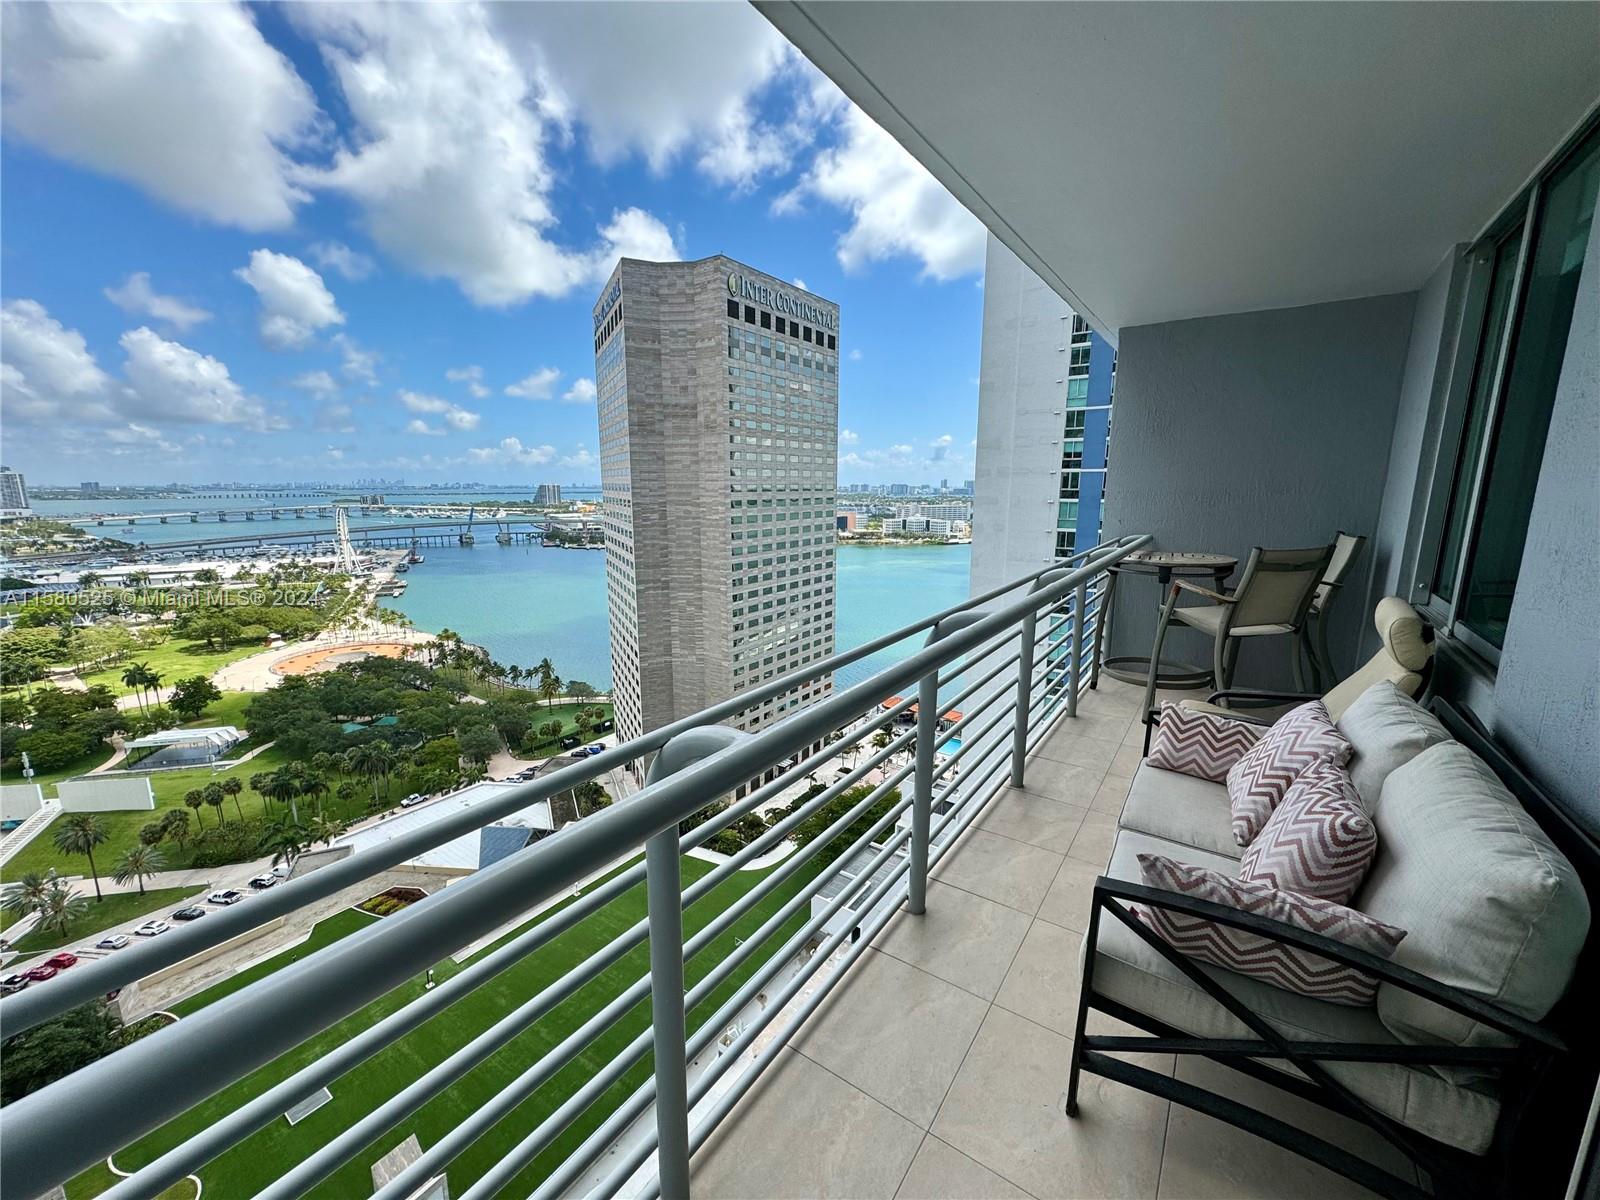 Newly renovated 1 bedroom, 1 bath in the heart of Downtown Miami, overlooking 
Biscayne Bay, Bayfront Park and Miami Skyline. Unit features stainless steel appliances, in-unit laundry, as well as an upgraded, spacious closet. Building amenities include: 2 gyms, sauna, 2 party rooms, conference rooms, convenience store with café, 24 hr security, valet, and concierge.  Centrally located, steps away from Hell's Kitchen, Whole Foods, Kaseya center, Bayside park, Brickell City Centre, Metromover, & Silverspot Movie Theater. Pool is currently under renovations. High Speed Internet, cable, & water included. 1 assigned garage parking included.

*Available furnished at a premium rental rate*